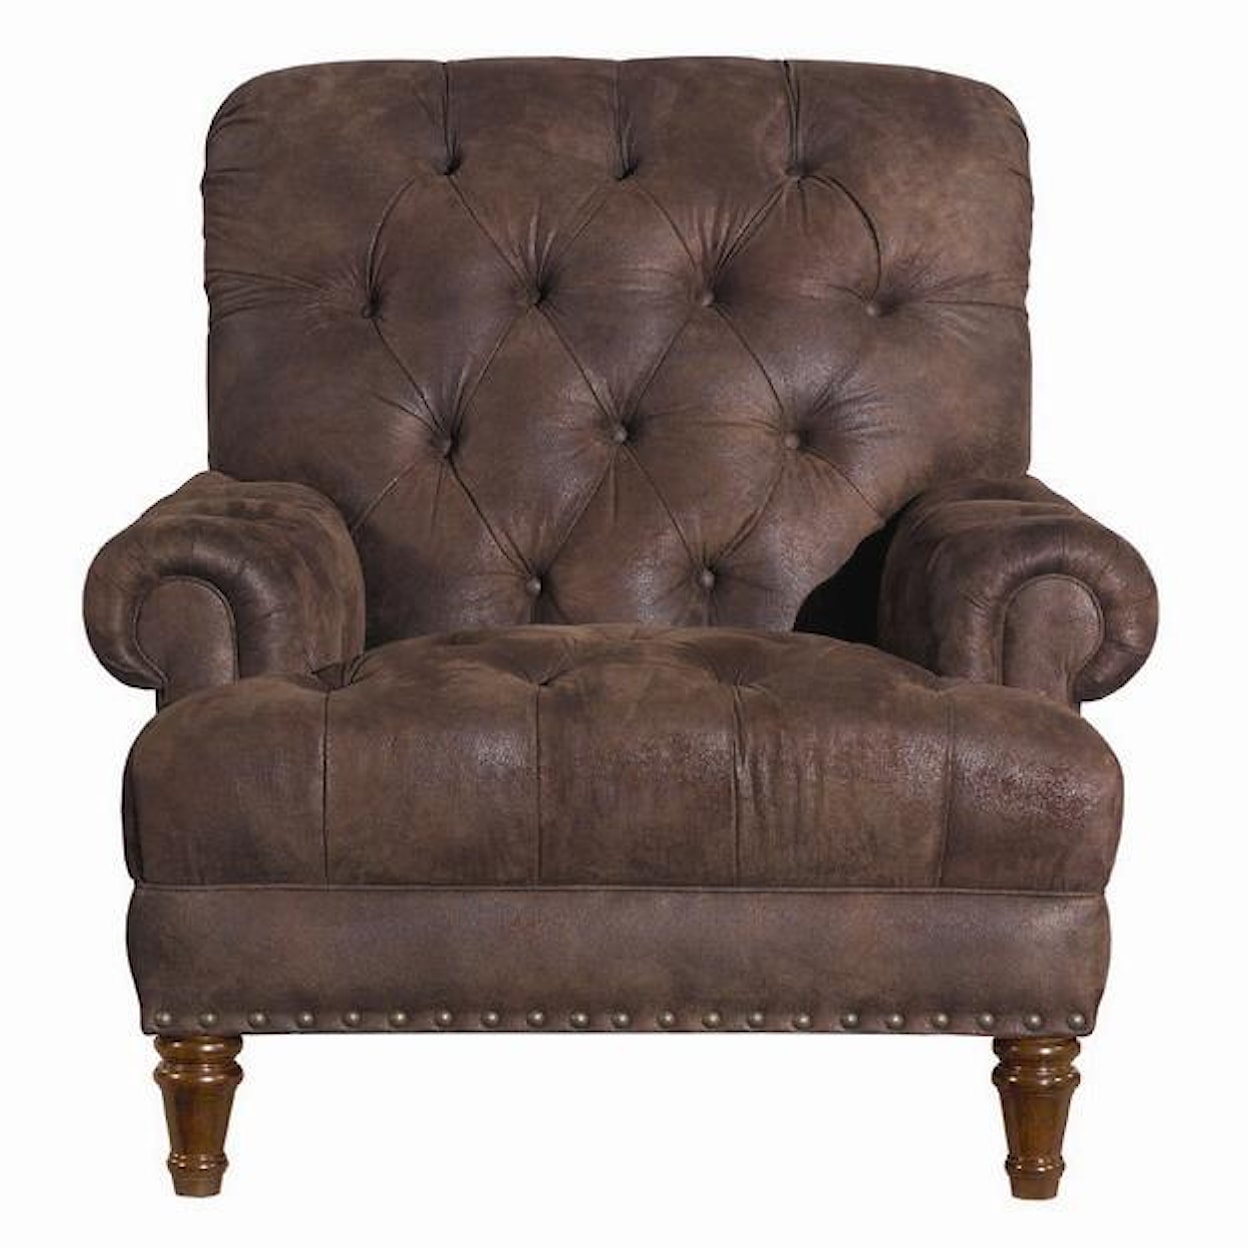 Kincaid Furniture Accent Chairs Tufted Accent Chair